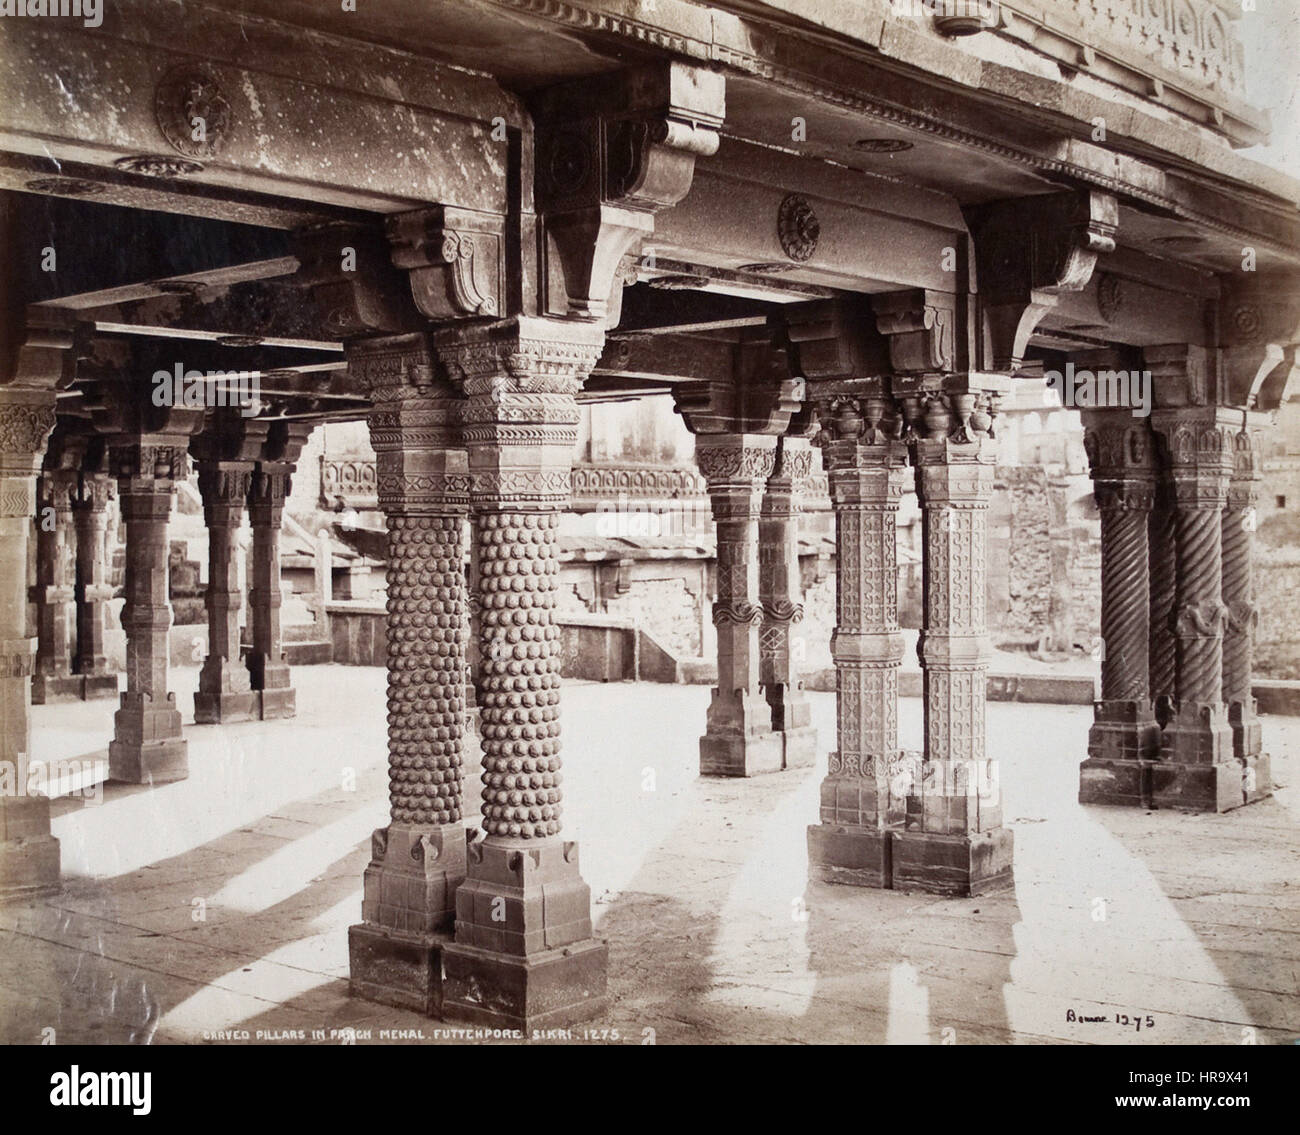 Colonne scolpite in Panch Mehal, Fetterpore Sikri Foto Stock